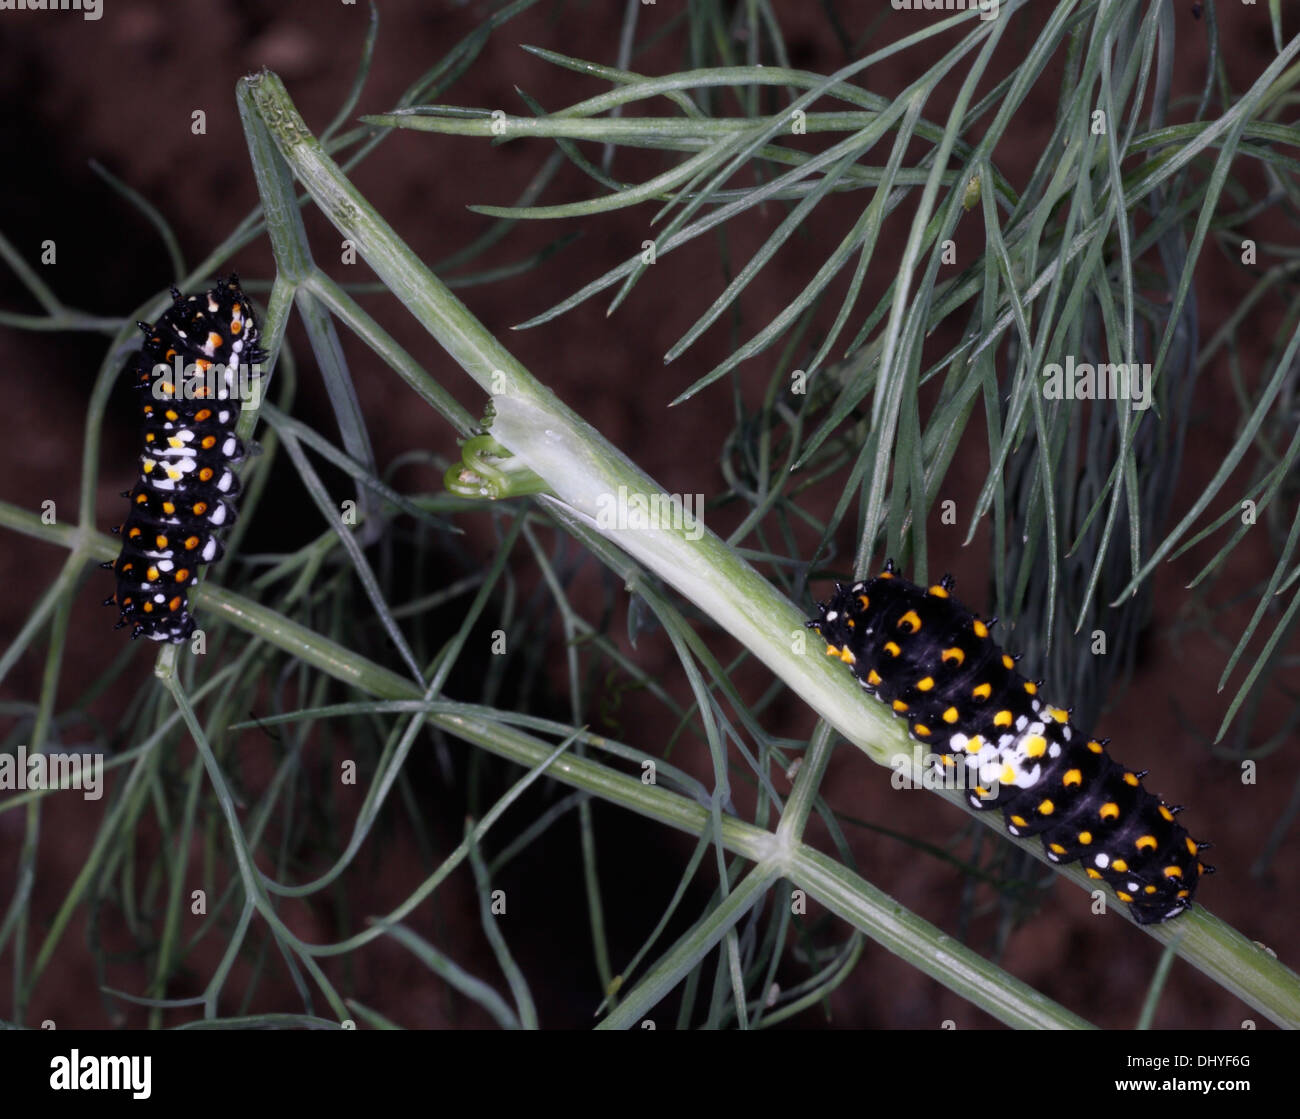 Two black swallowtail butterfly caterpillars (Papilio polyxenes) feeding on dill plant. Stock Photo